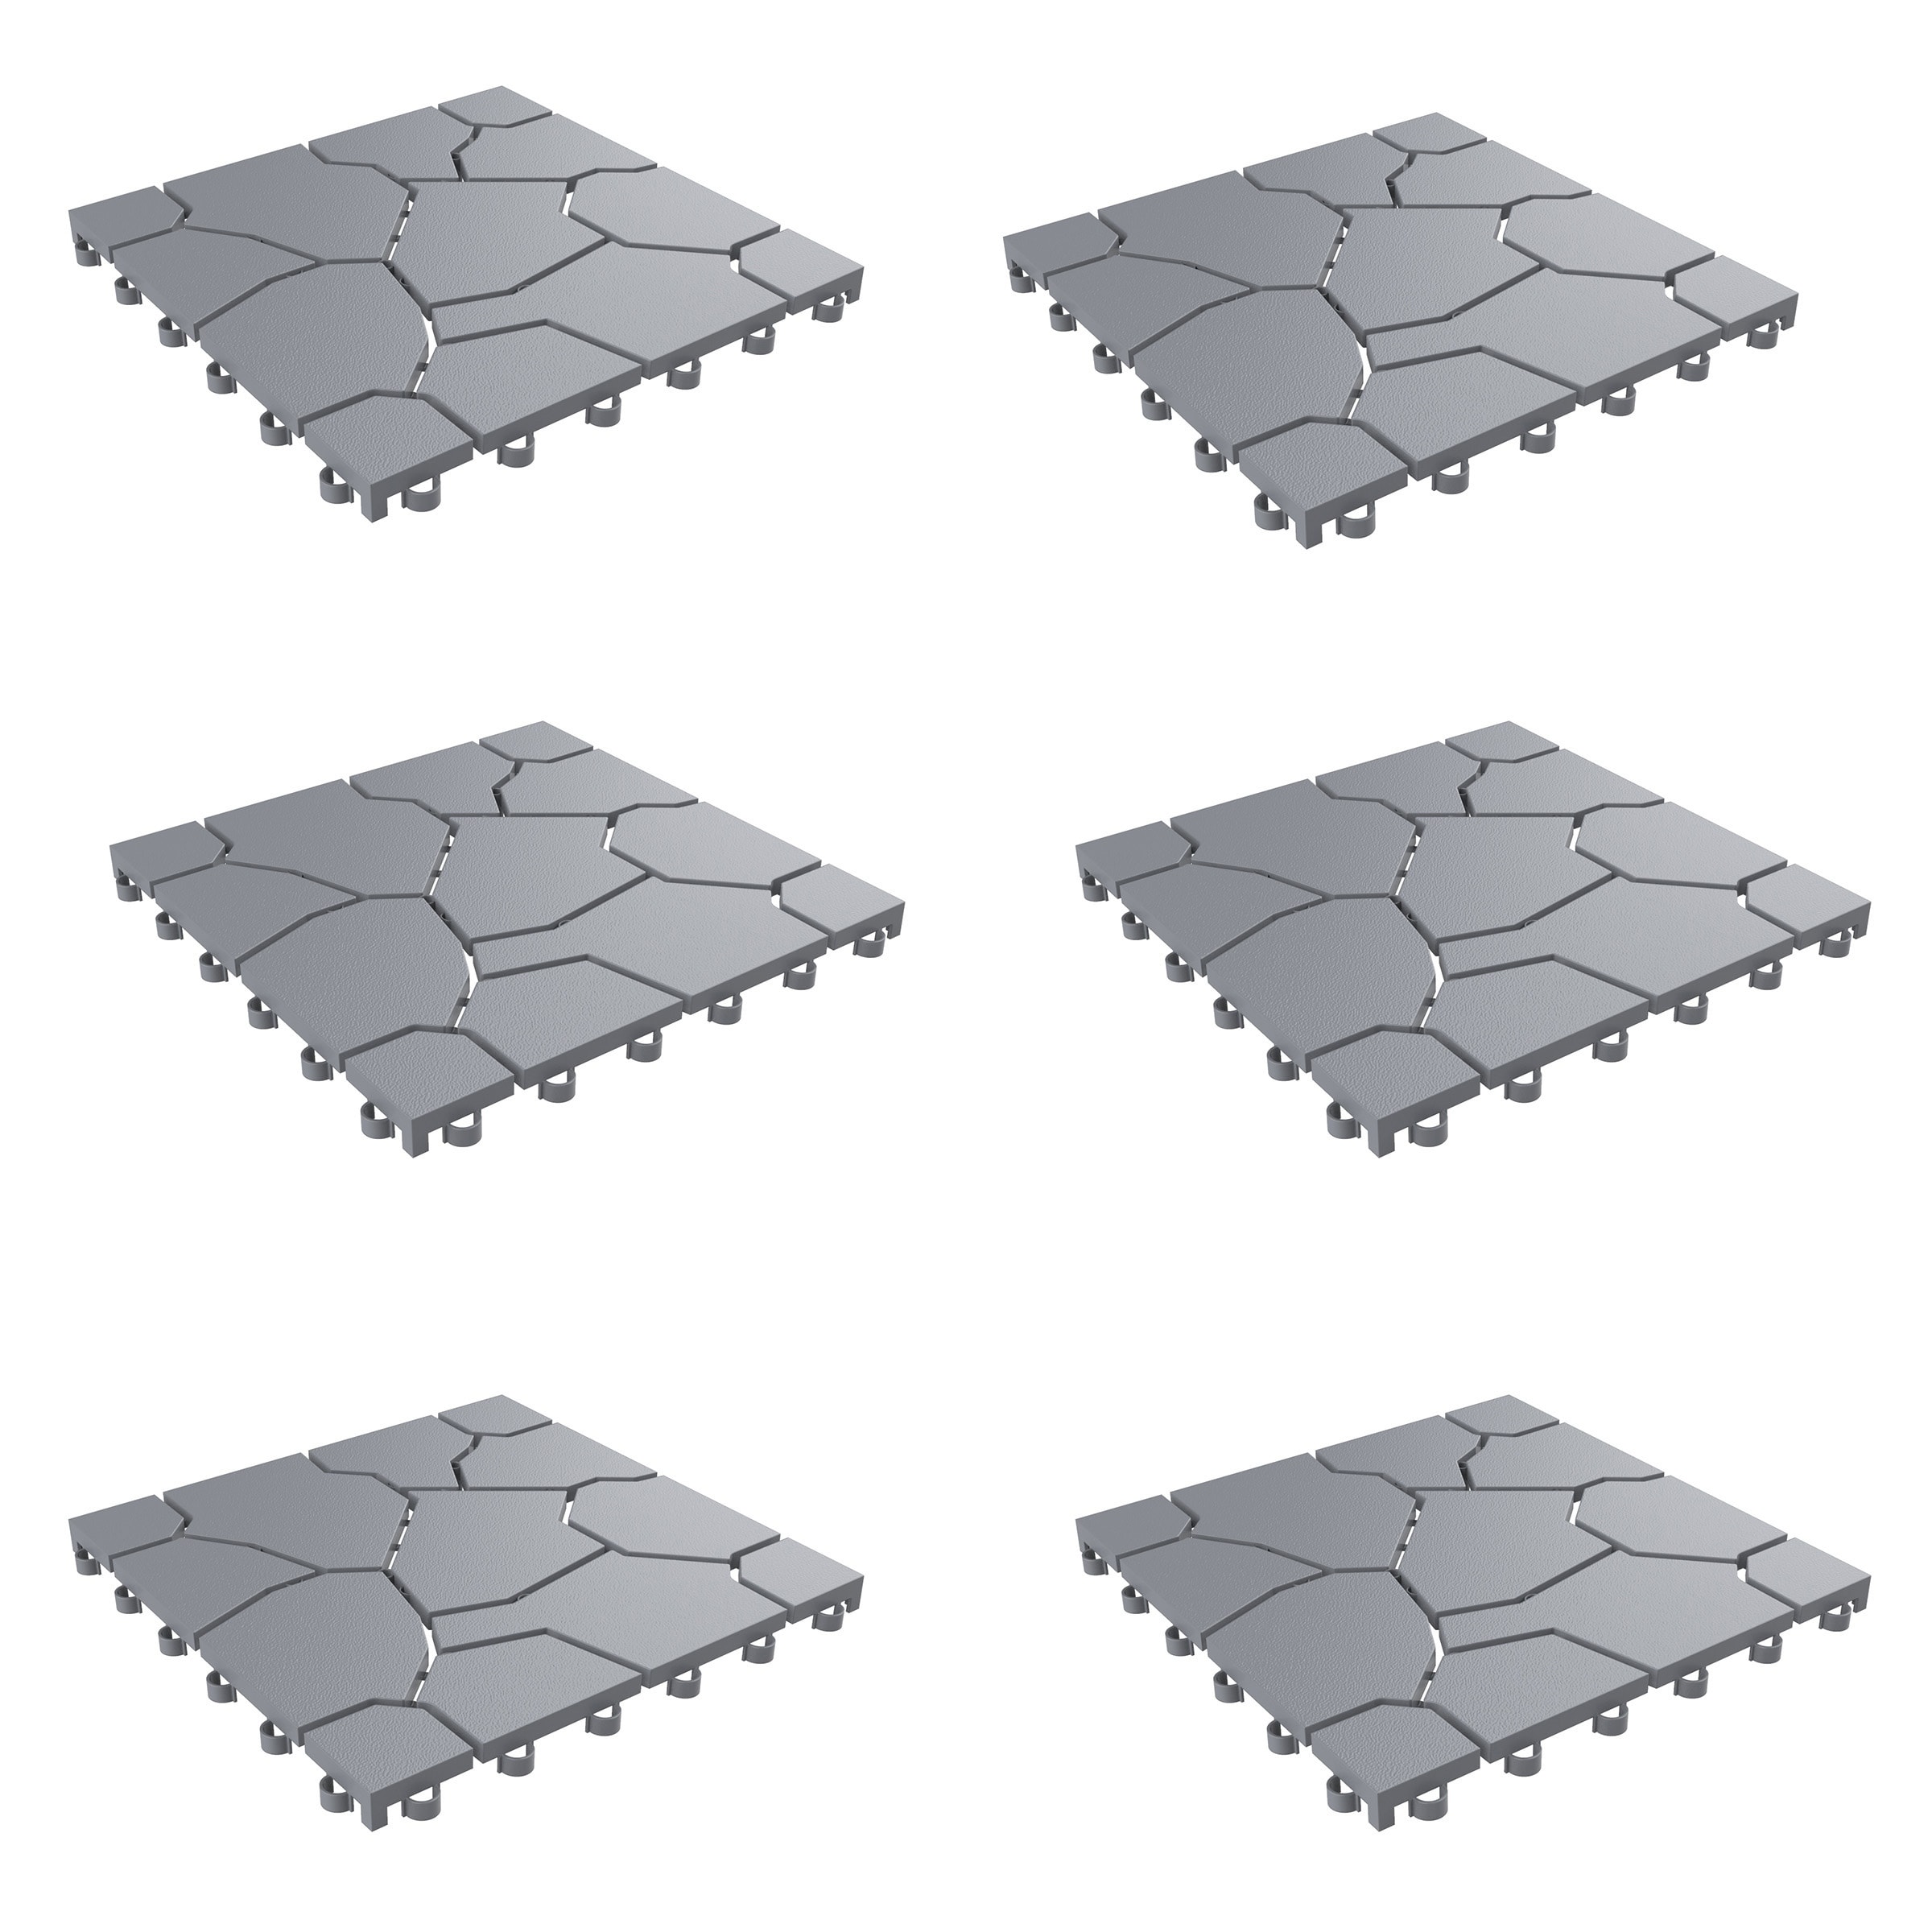 https://ak1.ostkcdn.com/images/products/26459216/Patio-and-Deck-Tiles-Set-of-6-Interlocking-Stone-Look-Outdoor-Flooring-Pavers-by-Pure-Garden-5b984bd9-b311-4f35-8a11-8553b2d5b77a.jpg